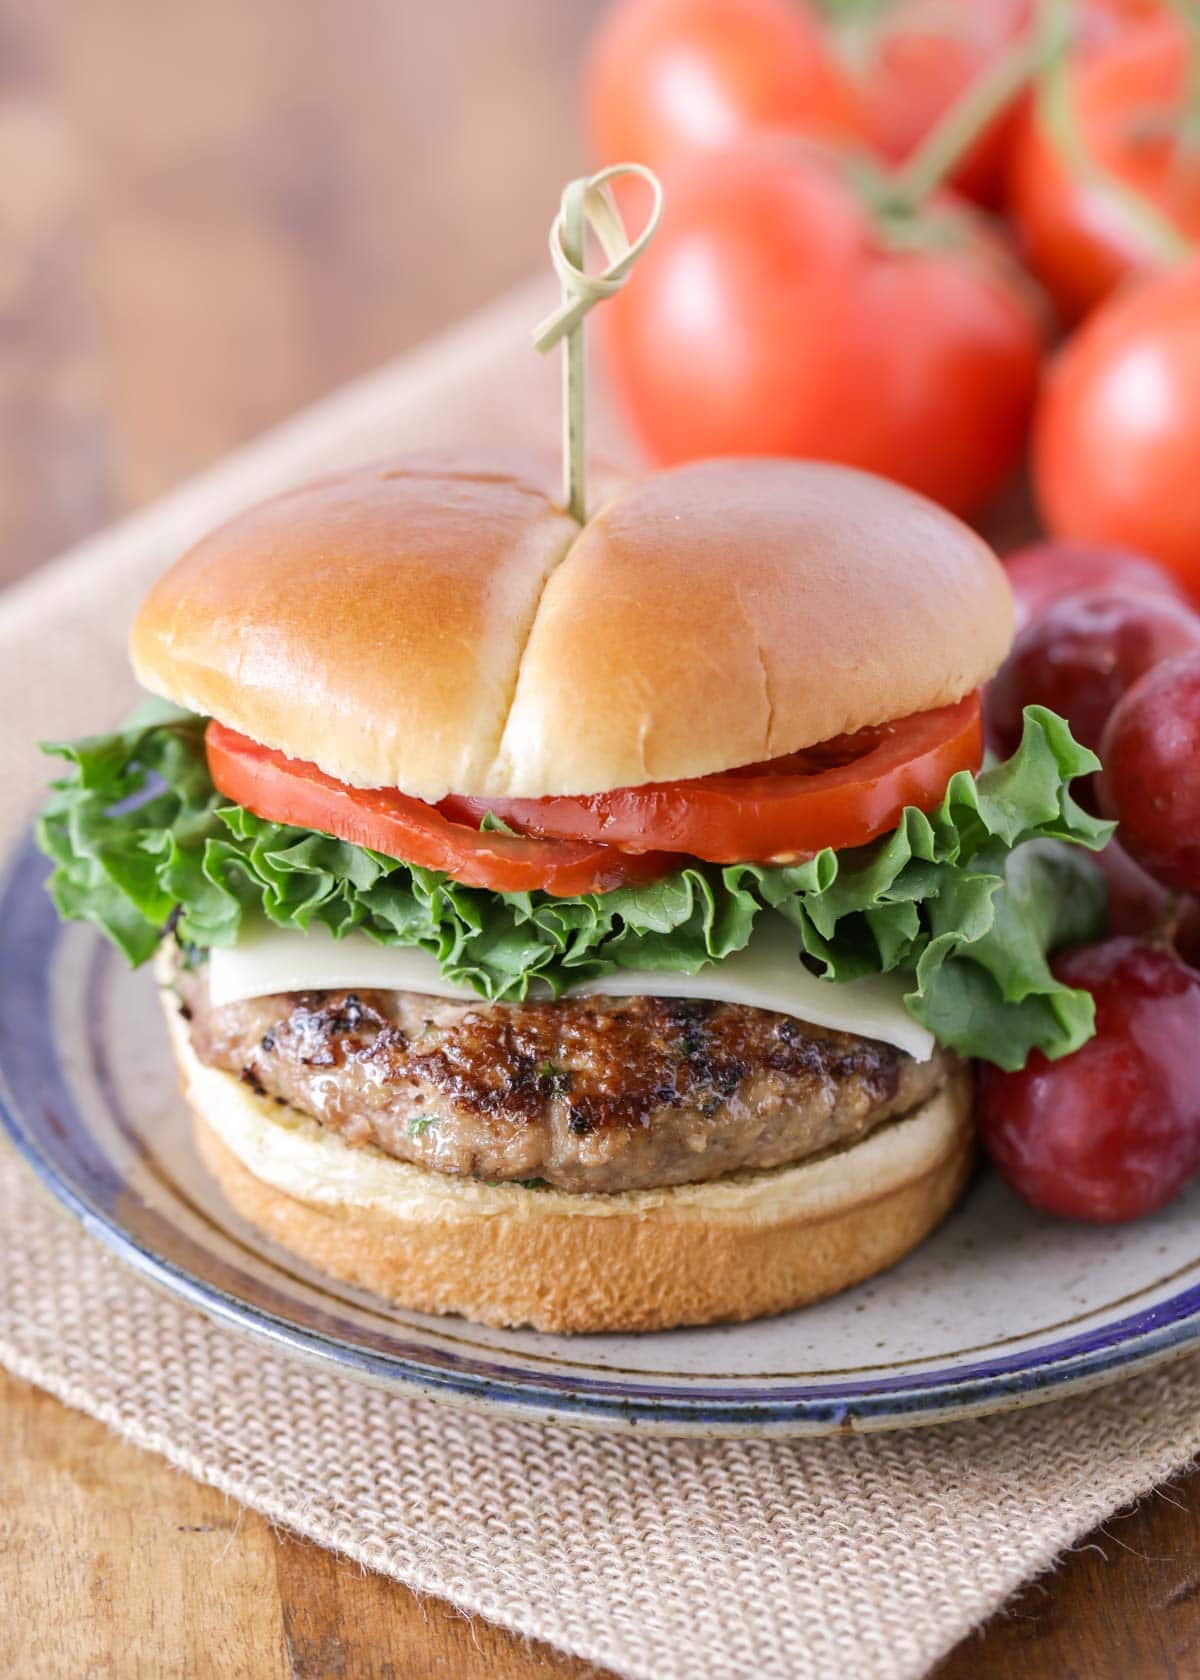 Turkey burger recipe on a bun with lettuce, tomato, and cheese served an a blue striped plate.